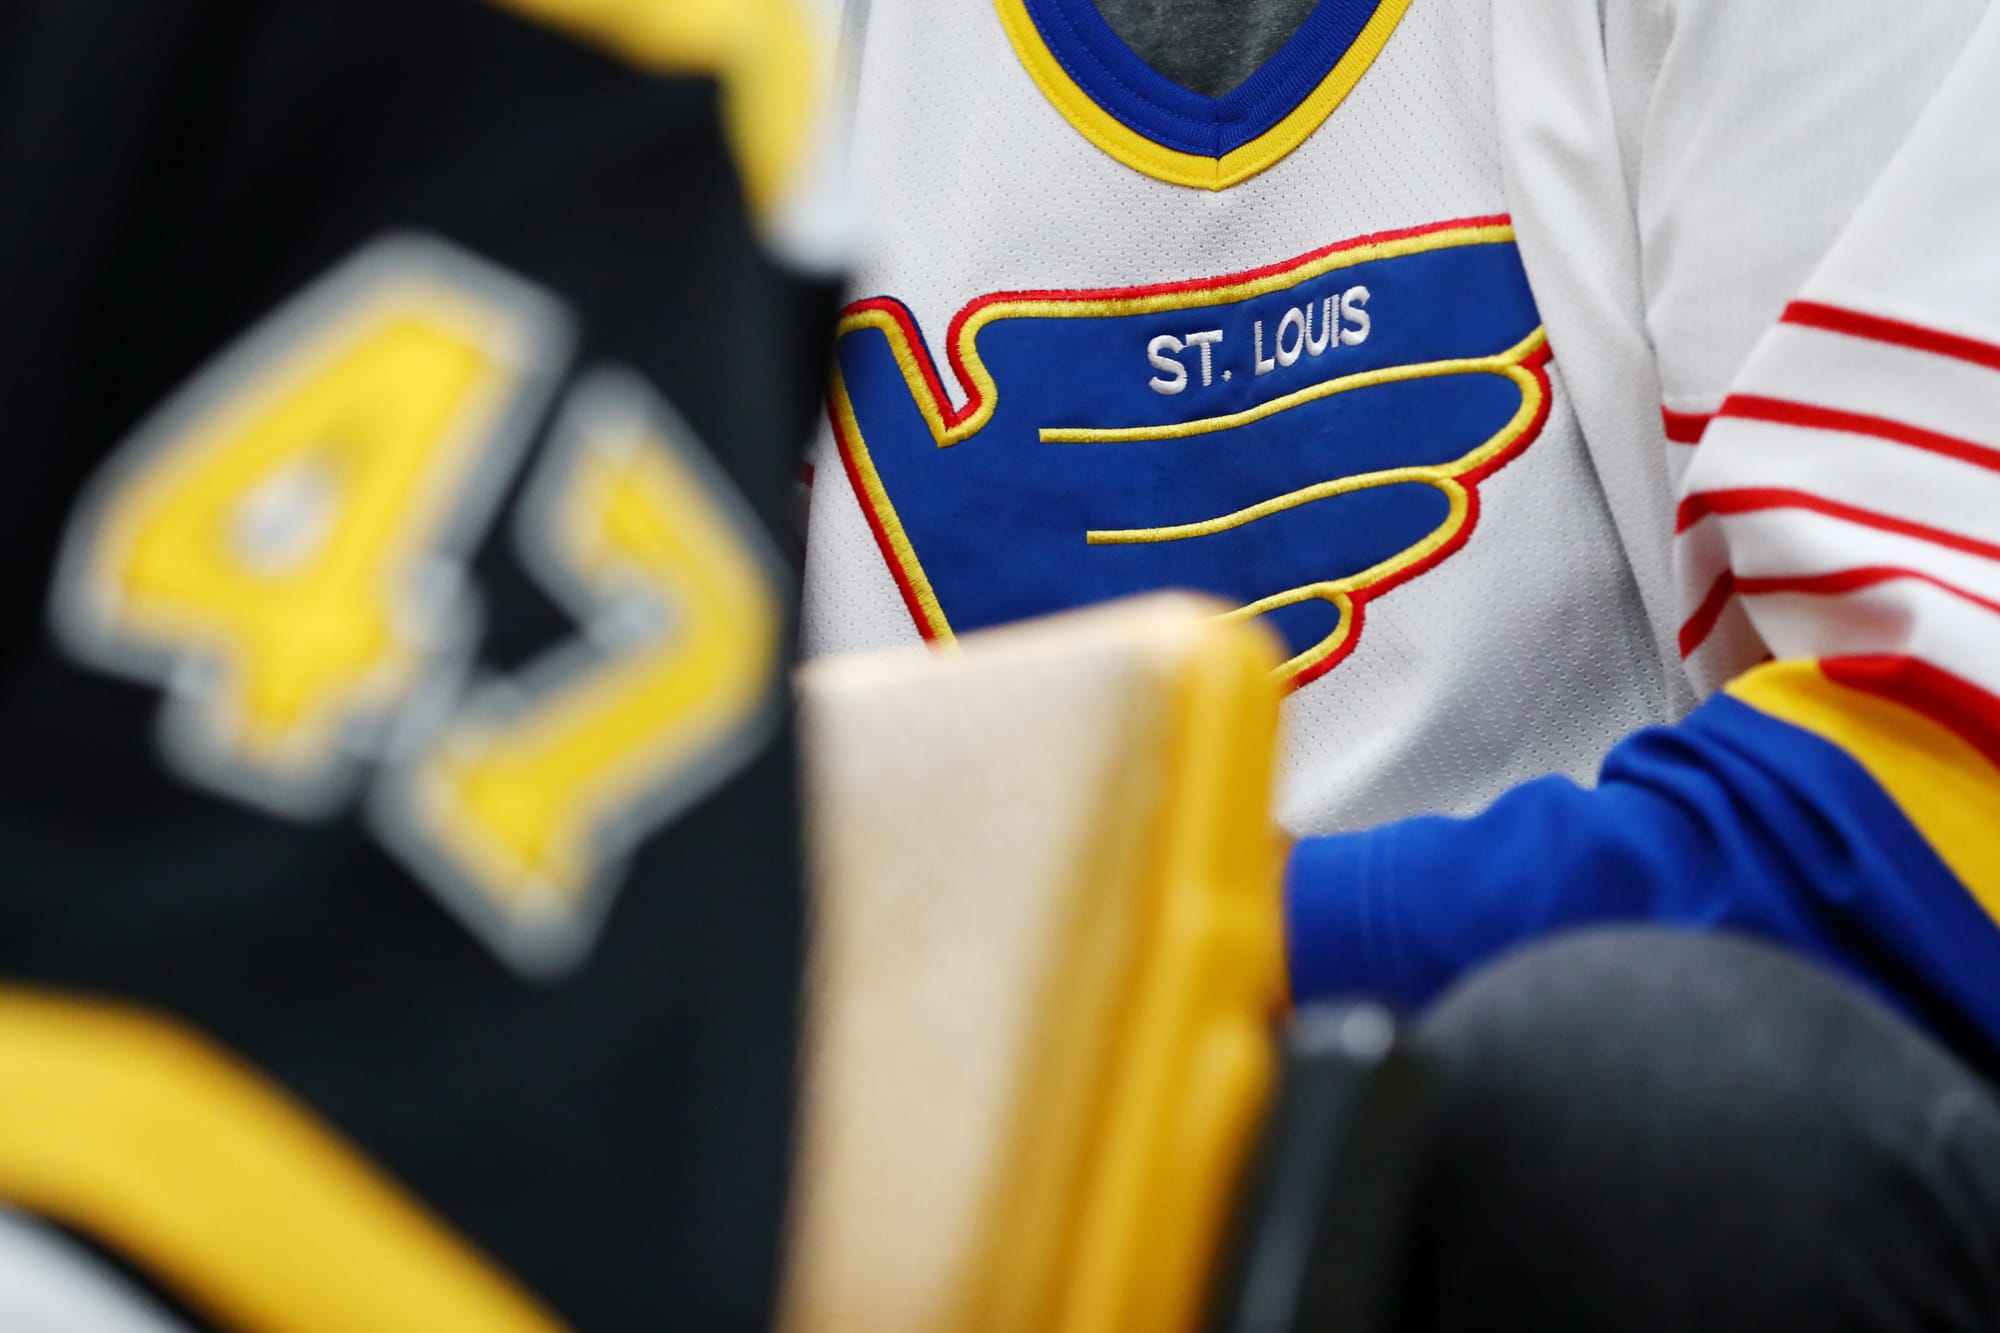 Thoughts on this St.Louis blues Reverse Retro concept? Based off